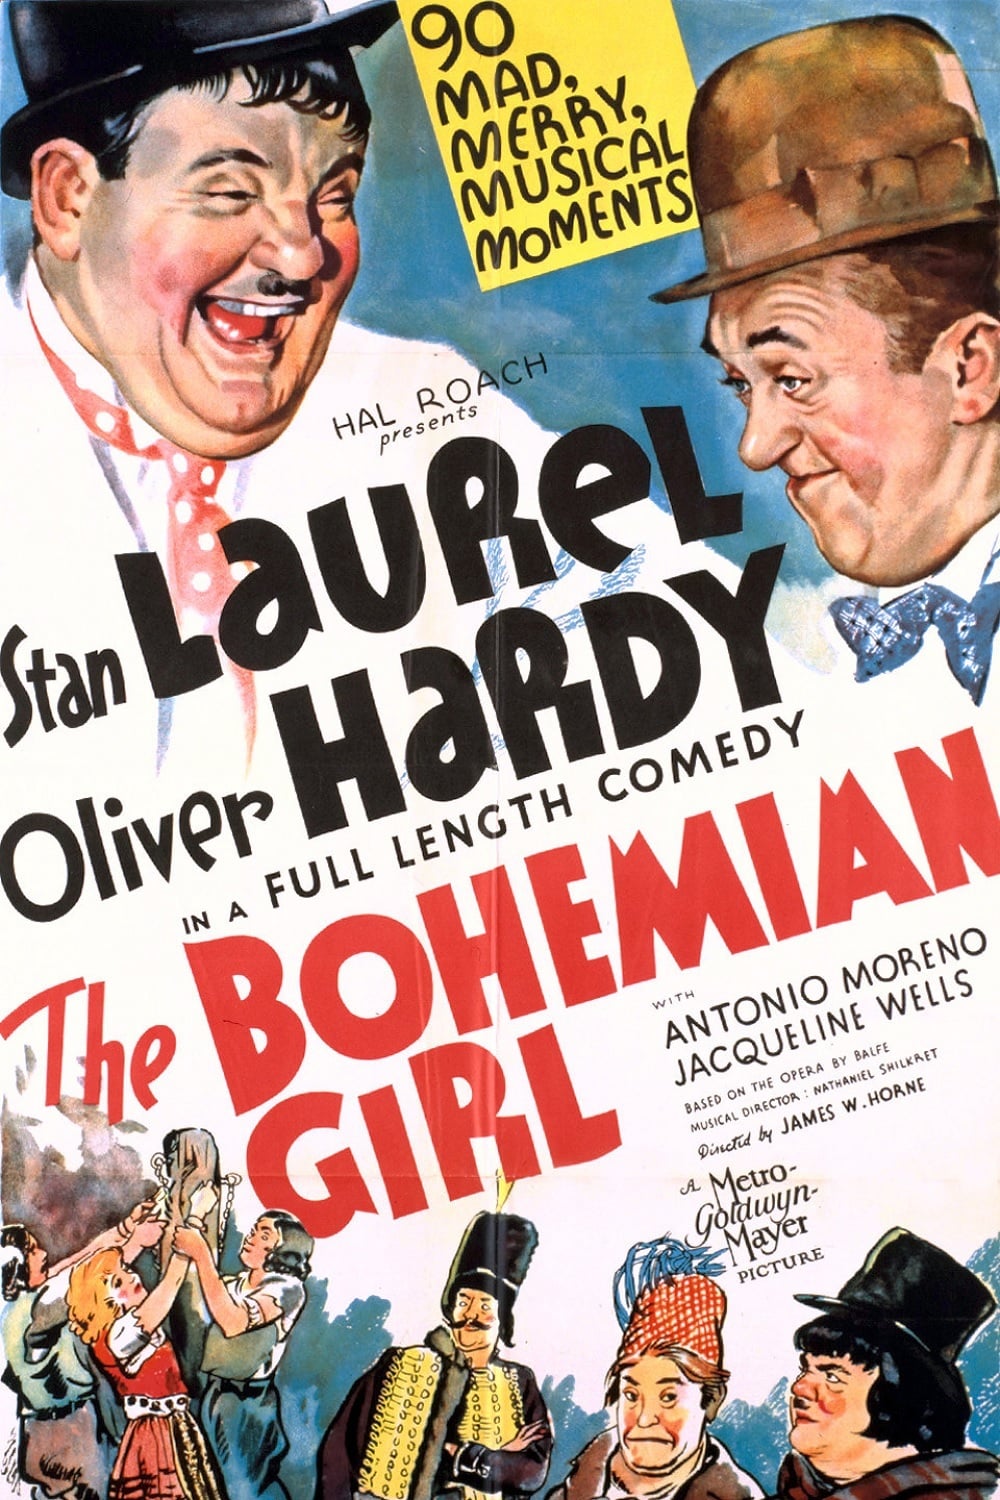 Poster for the movie "The Bohemian Girl"